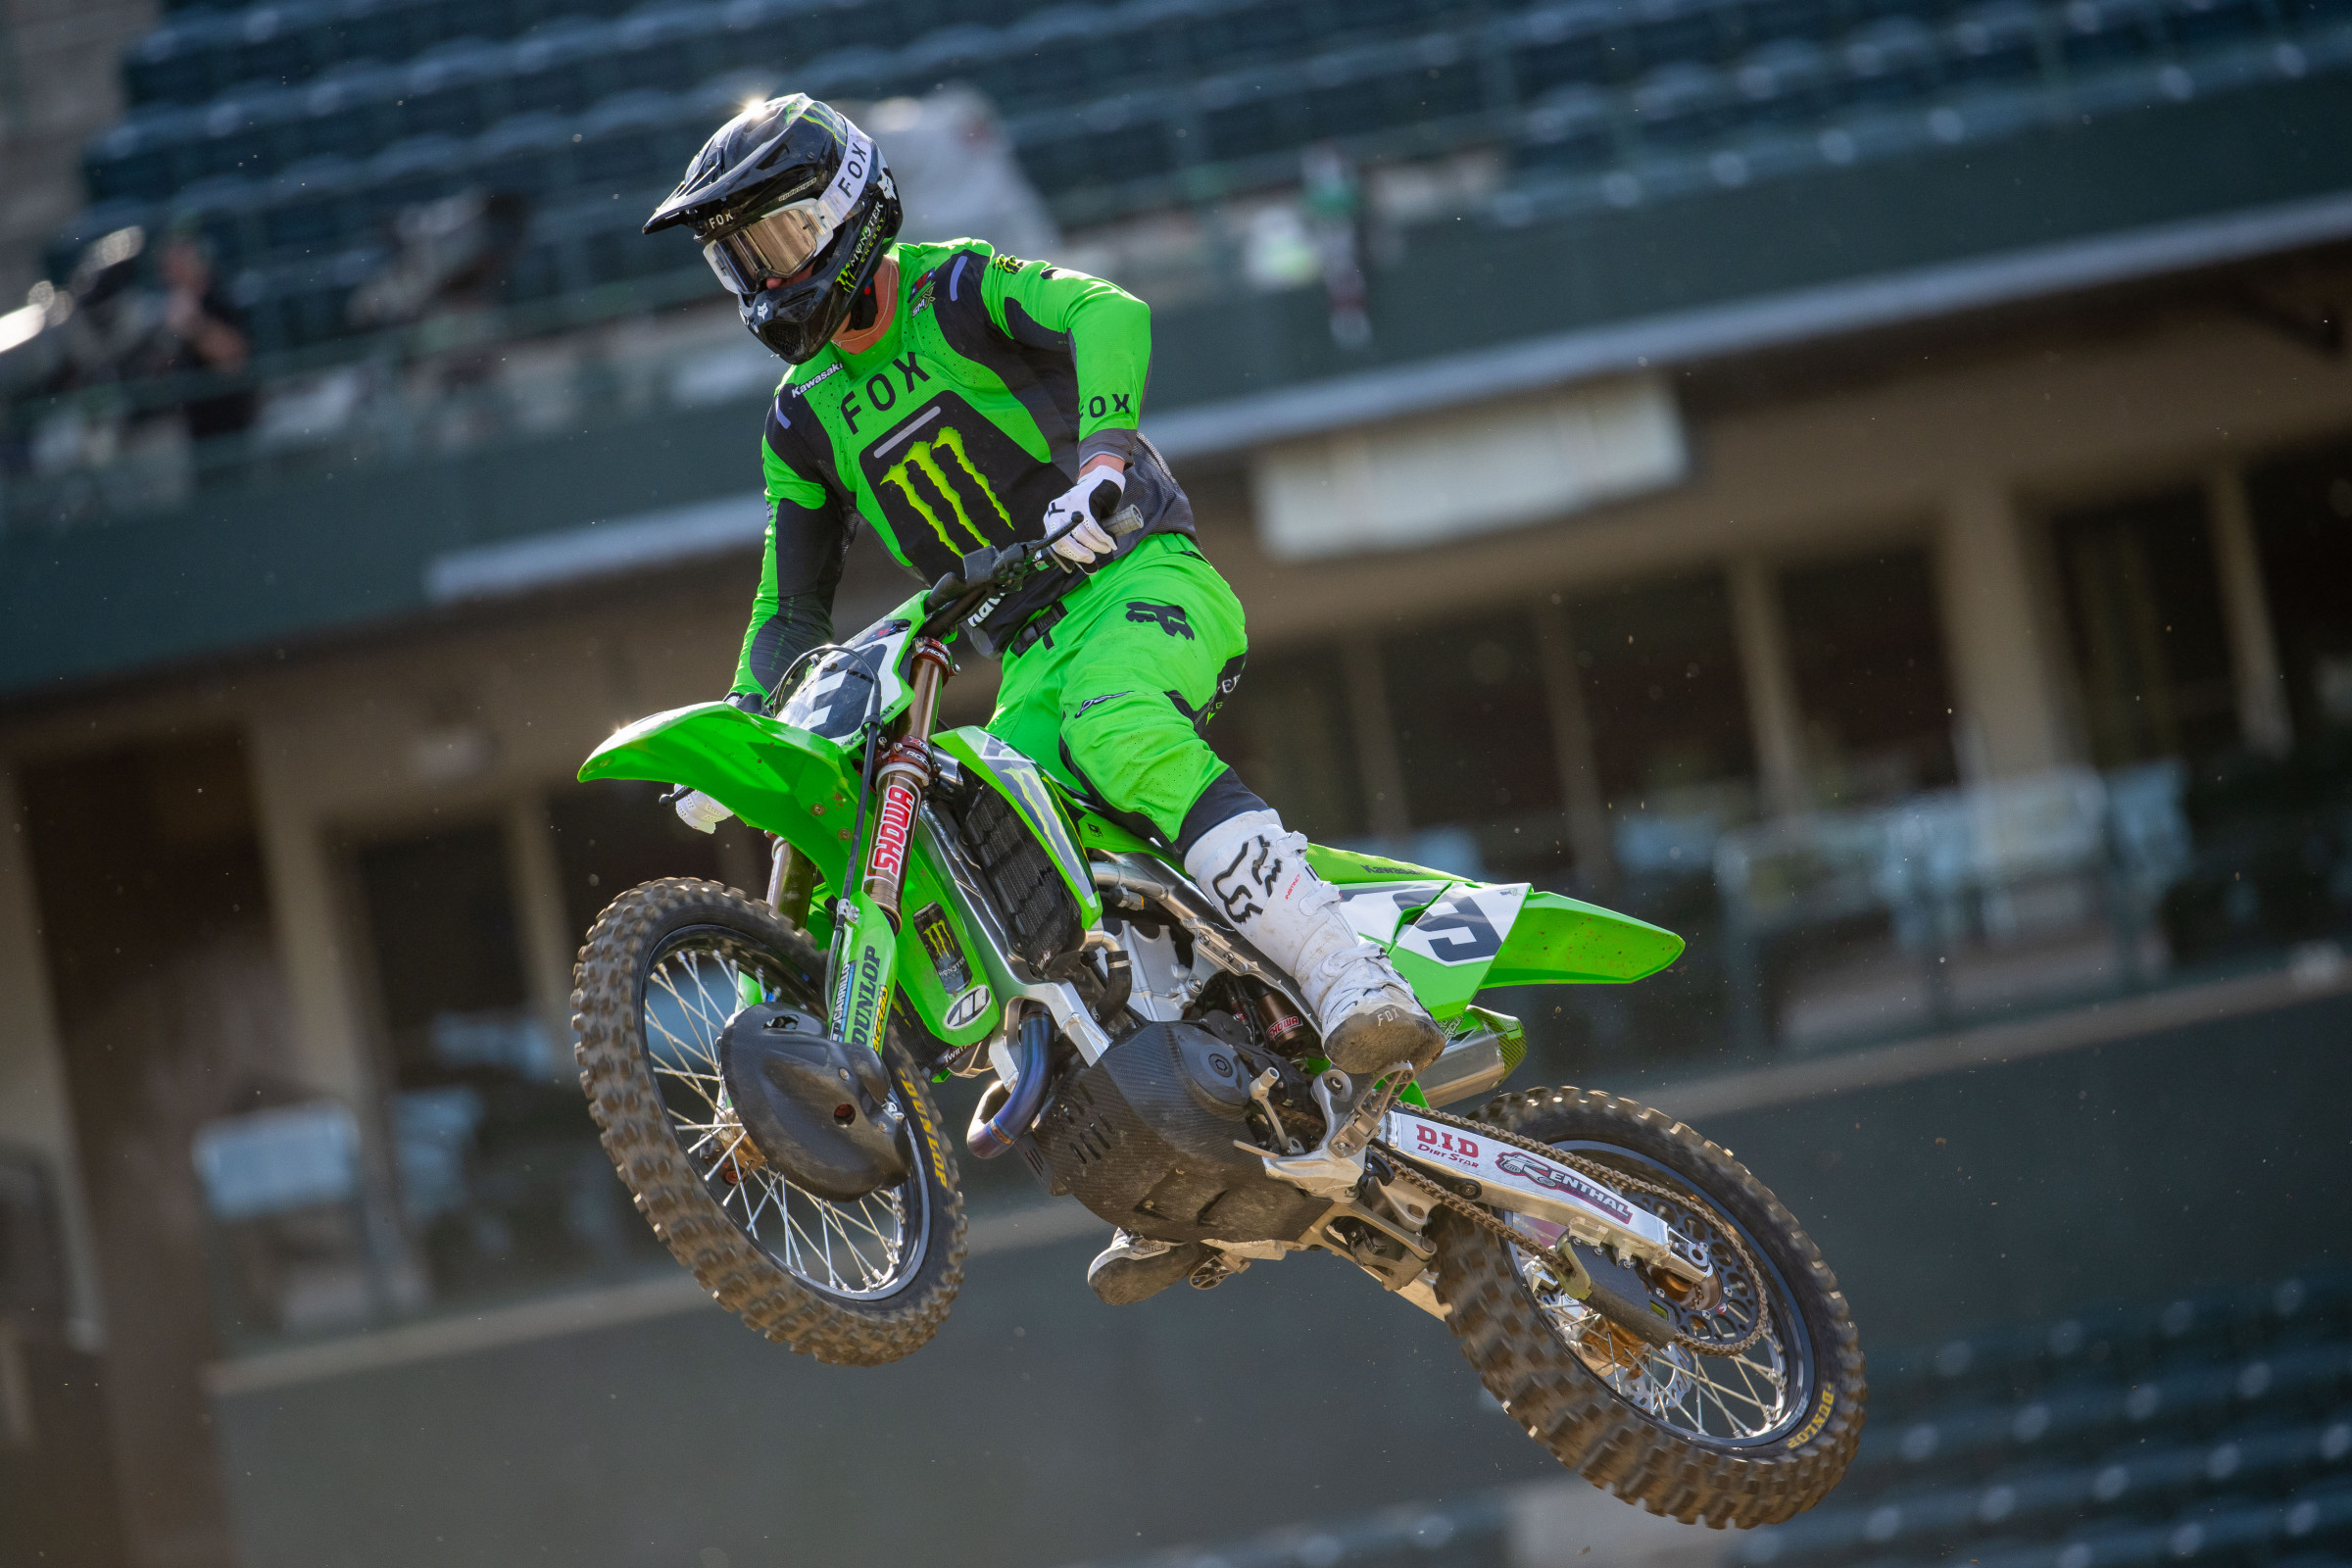 Adam Cianciarulo has been ruled out for tonight's Anaheim 2 Supercross.